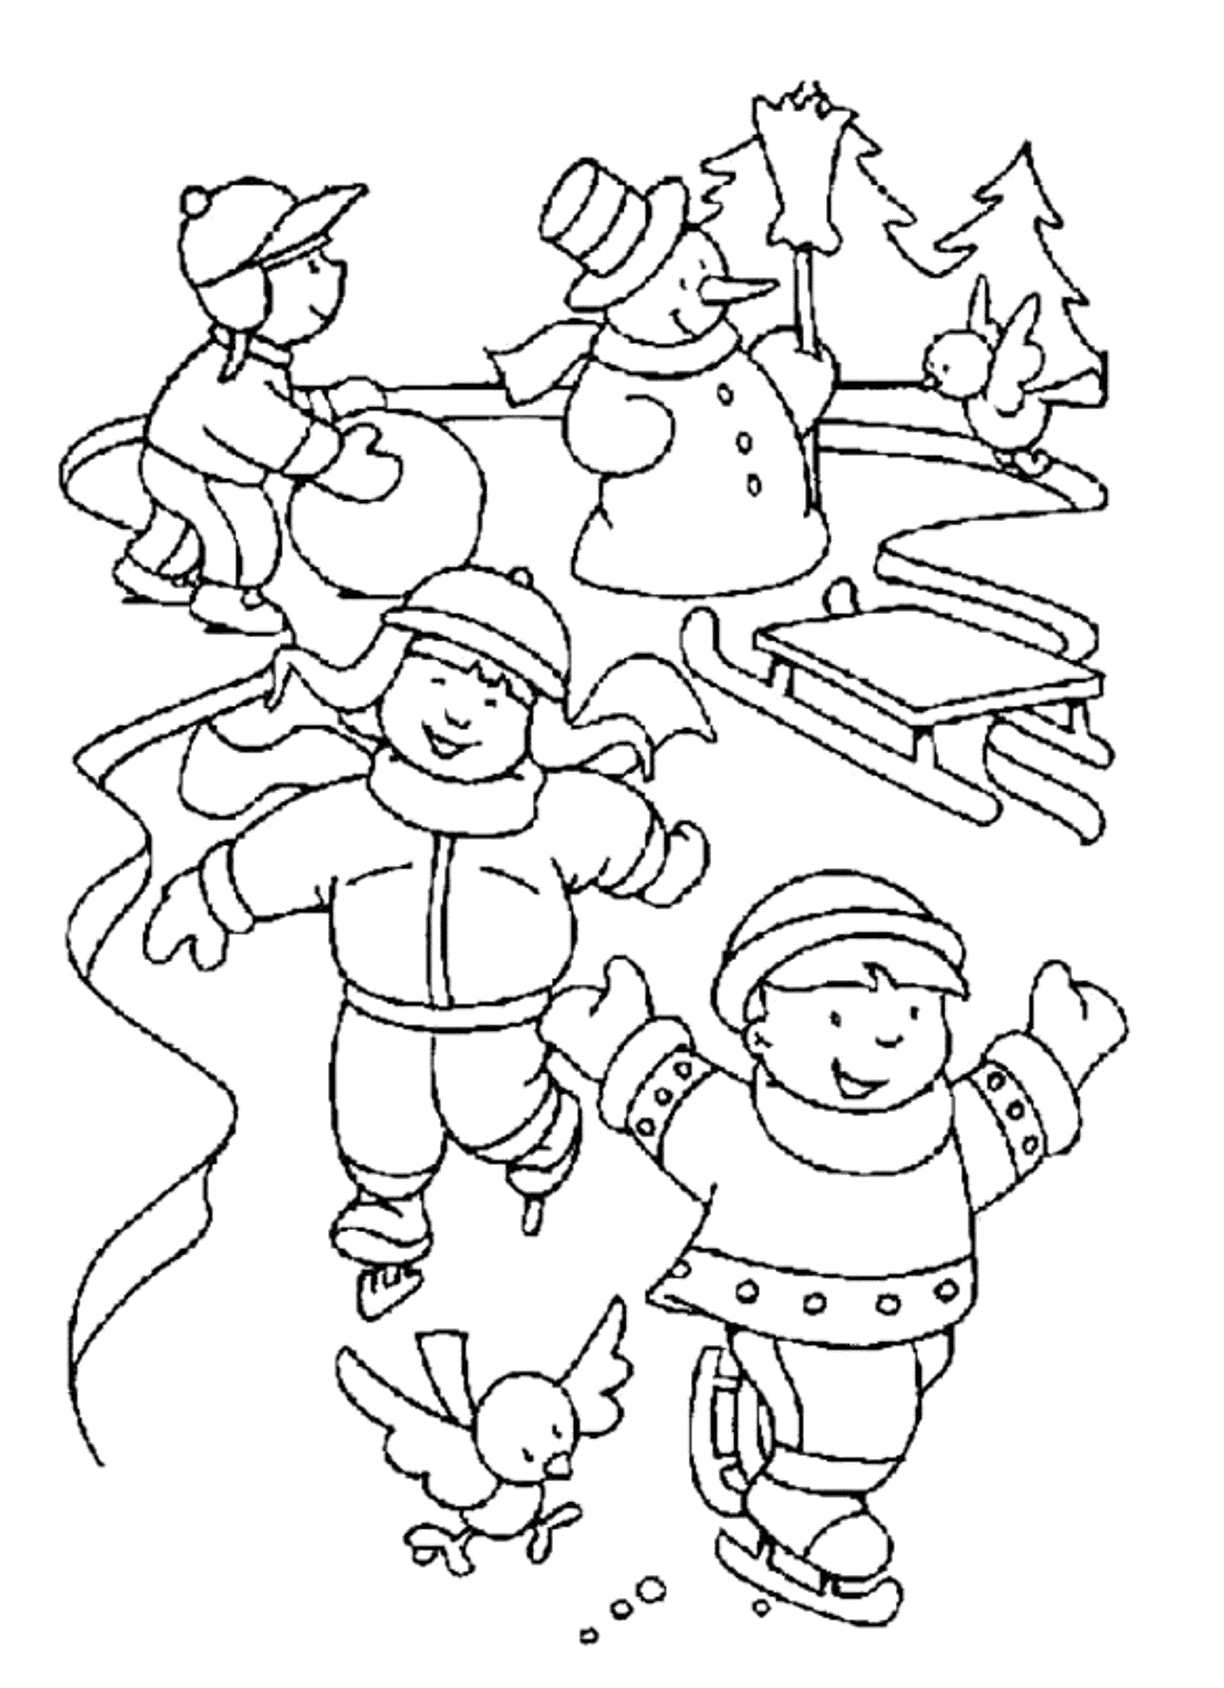 Skate with friends Winter Coloring Pages | coloring pages for kids |